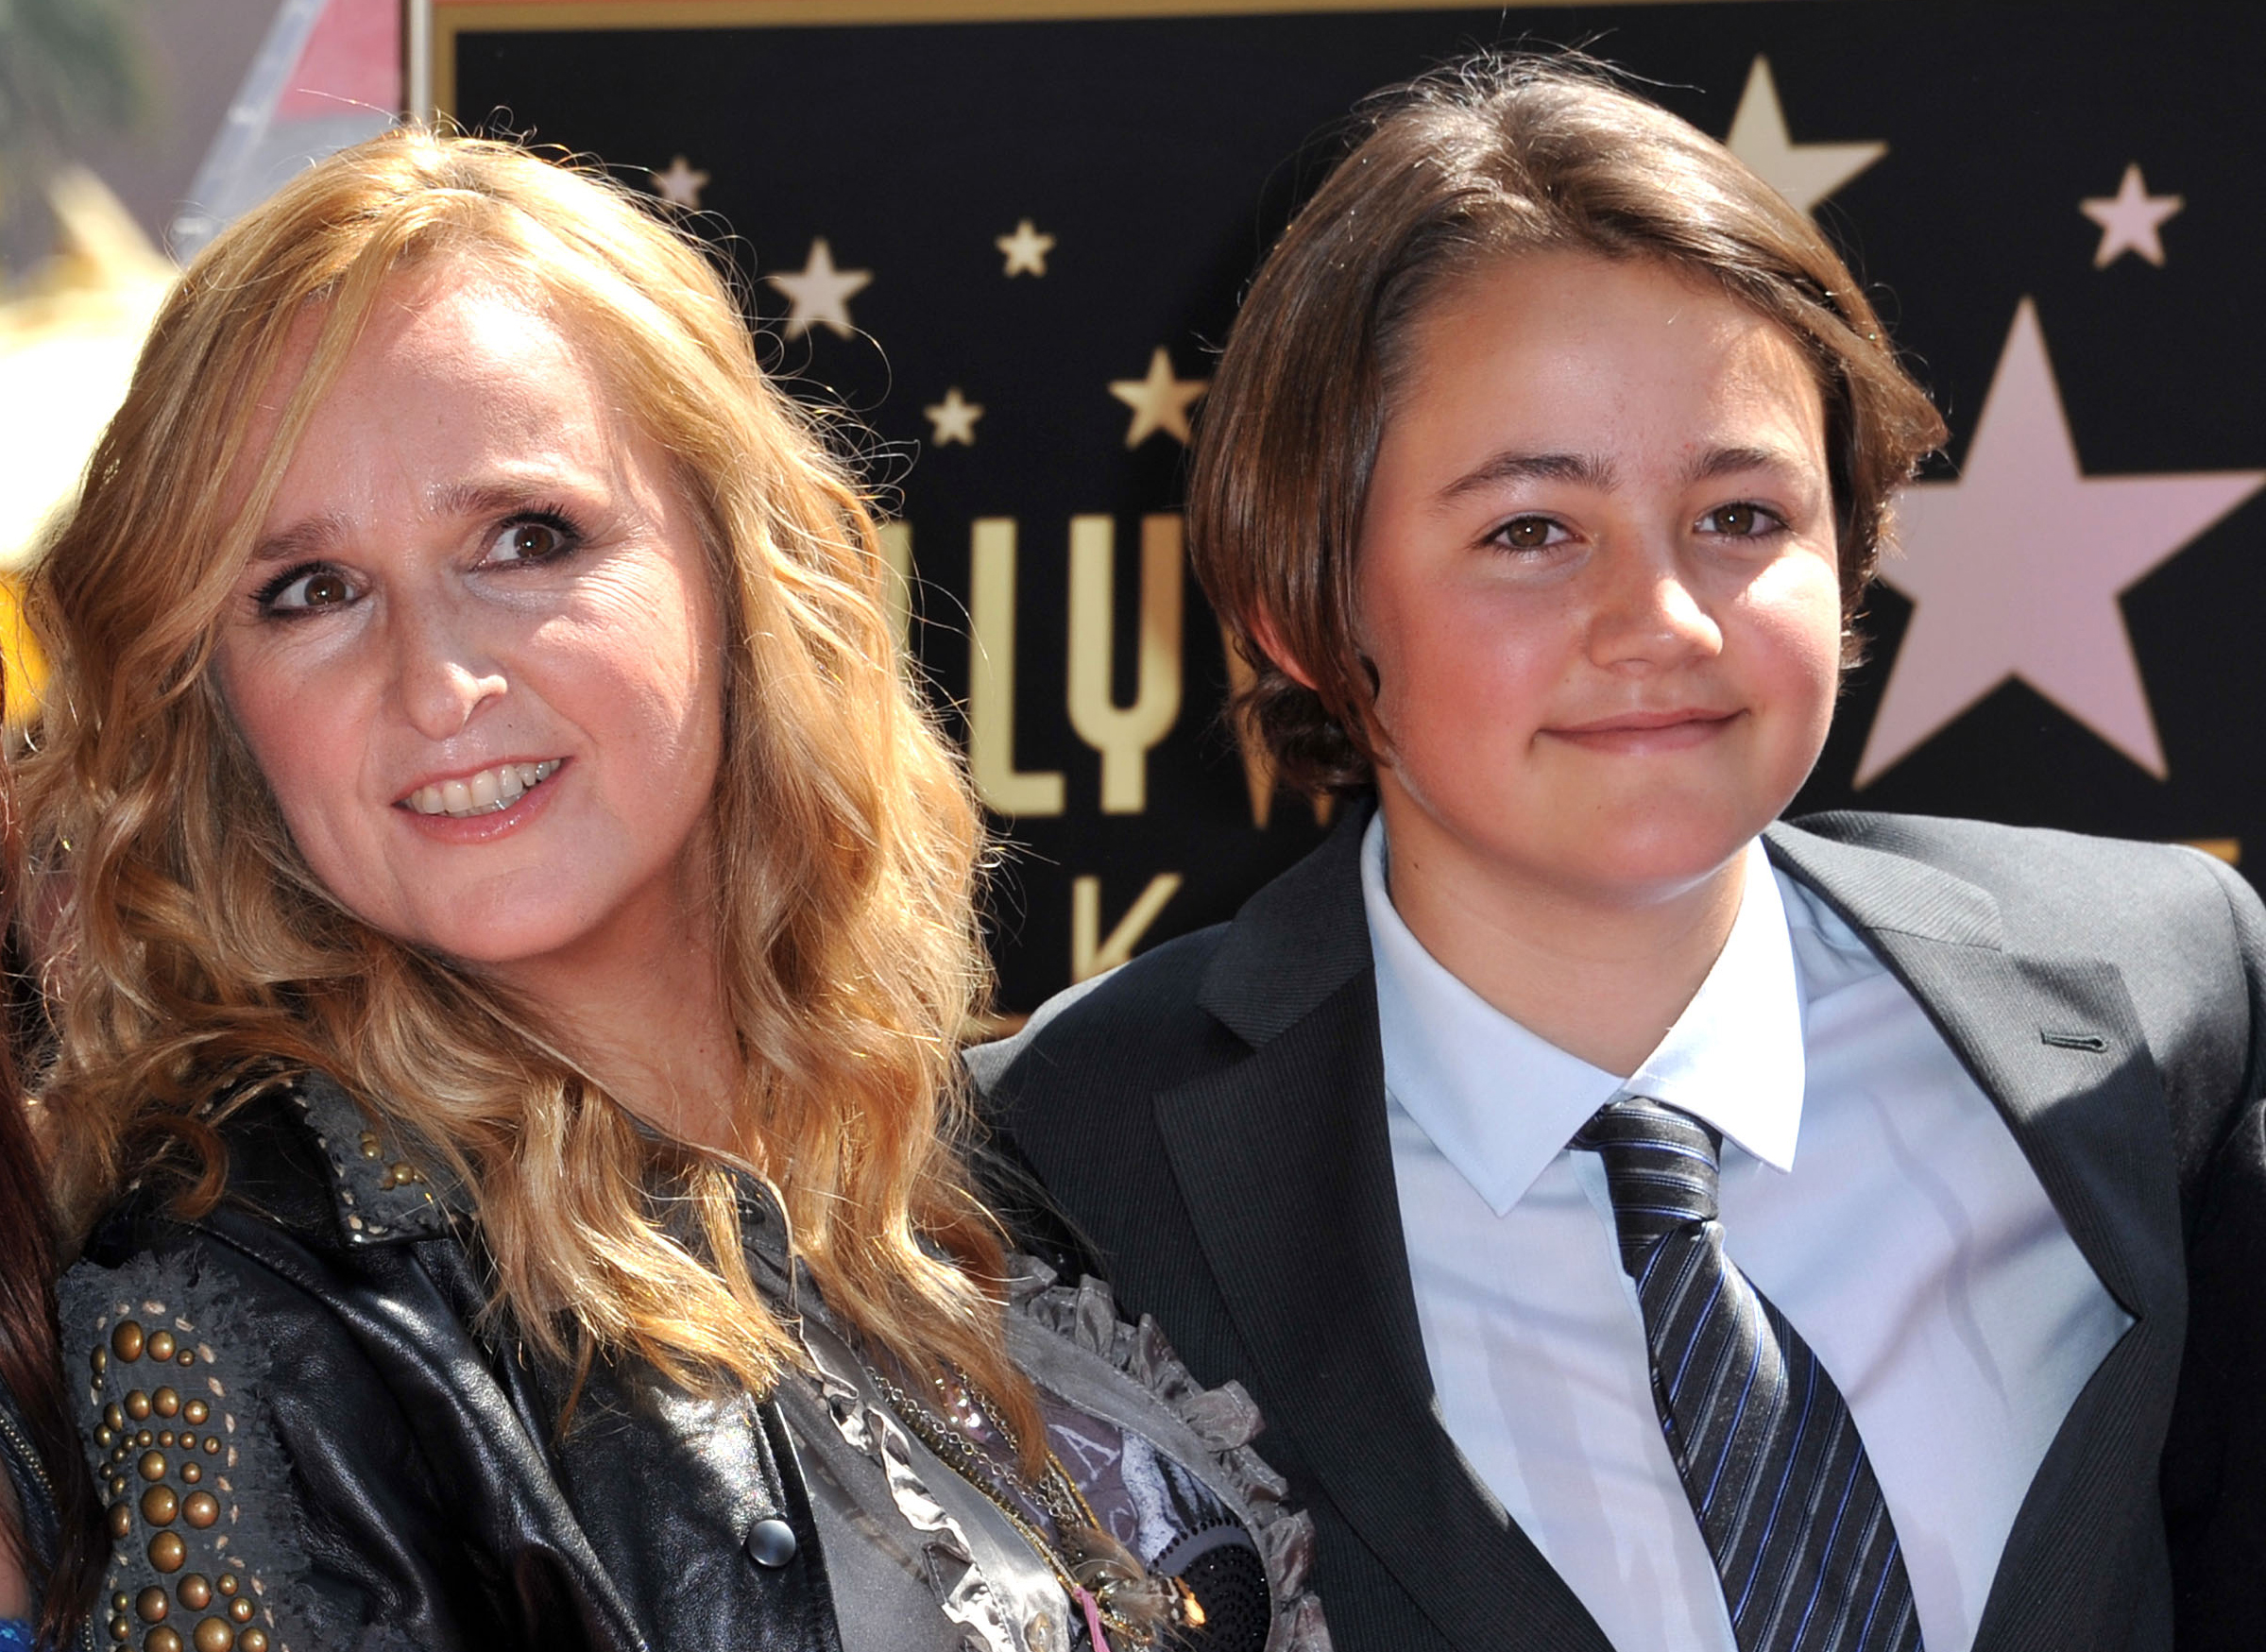 Melissa Etheridge and Beckett Cypher posing during her Walk of Fame ceremony held at the Hard Rock Cafe in Hollywood on September 27, 2011 | Source: Getty Images